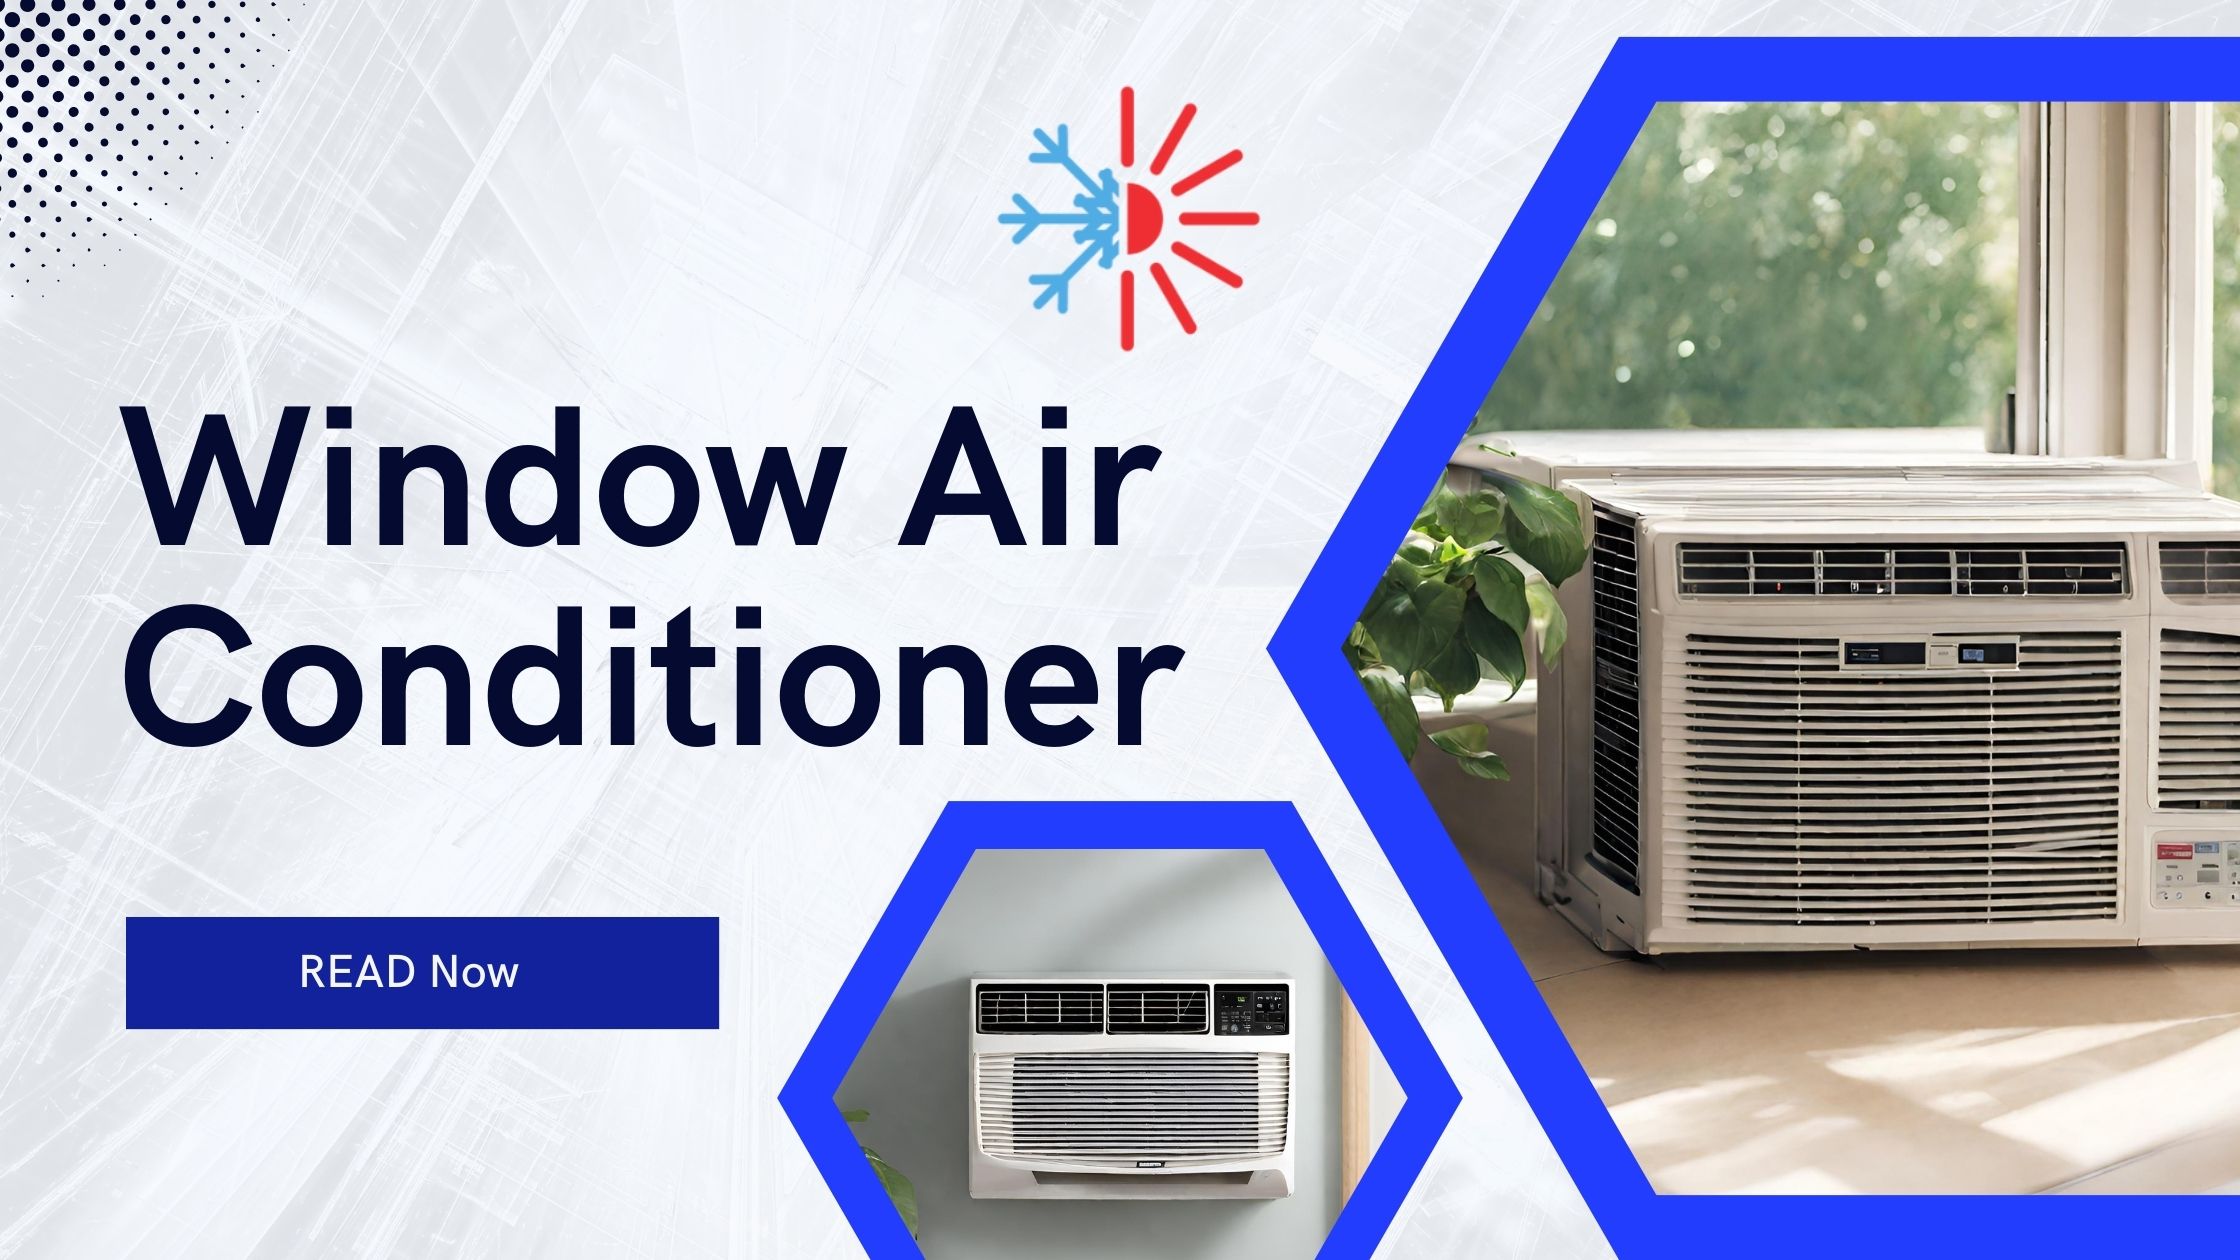 What’S The Difference Between A Split-System And A Window Air Conditioner?